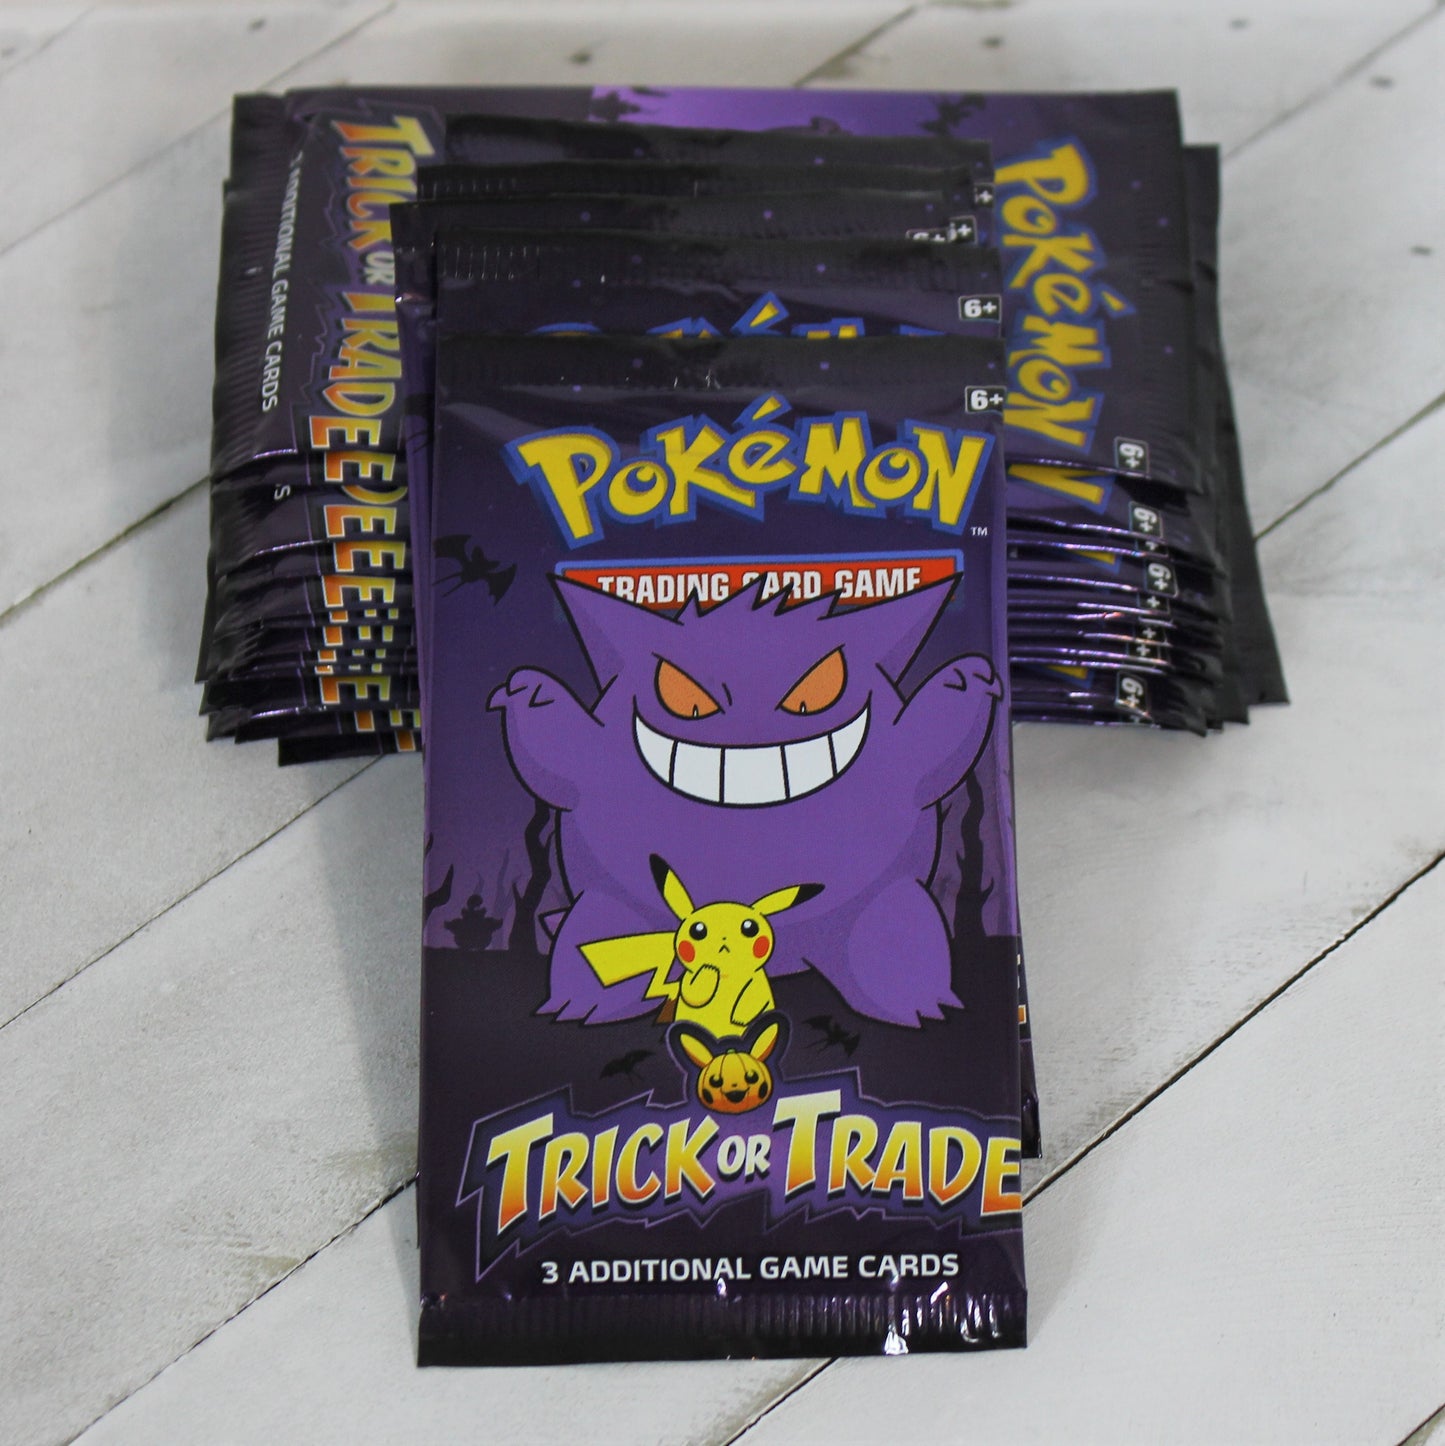 Pokemon Trading Card Game Trick or Trade Booster Pack